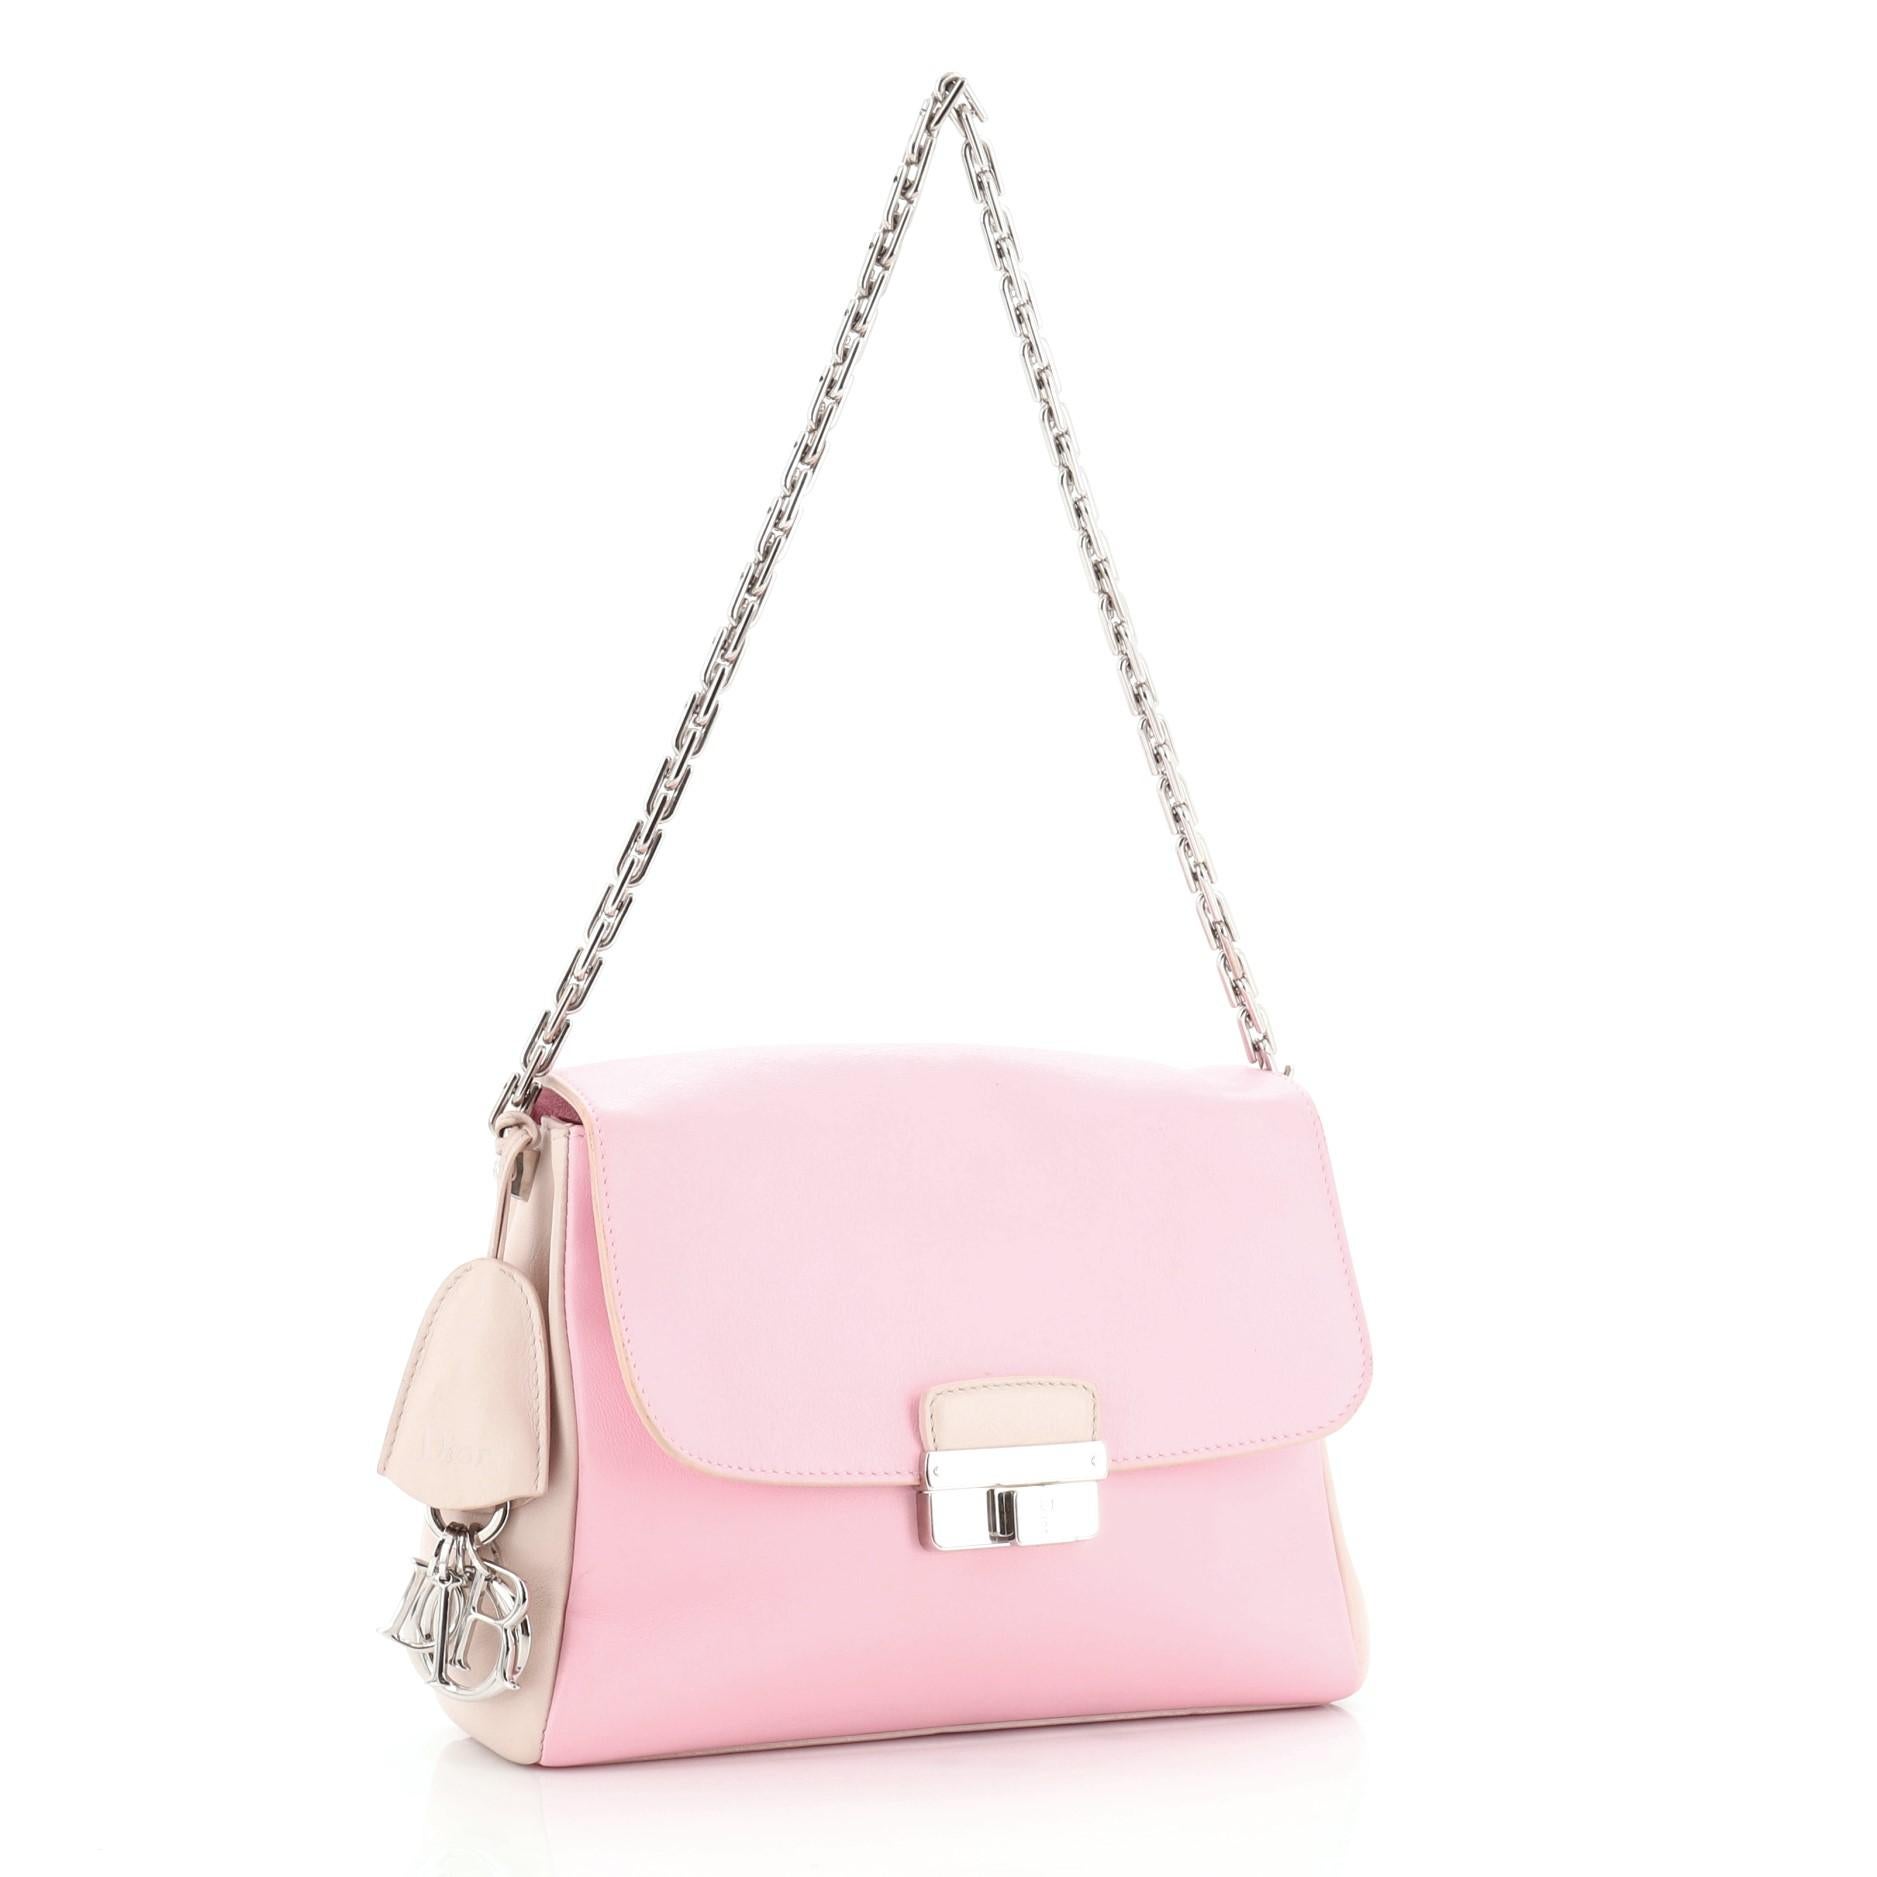 This Christian Dior Diorling Shoulder Bag Leather Large, crafted from pink neutral multicolored leather, features chain link shoulder strap, exterior back pocket, and silver-tone hardware. Its push-lock closure opens to a pink leather interior